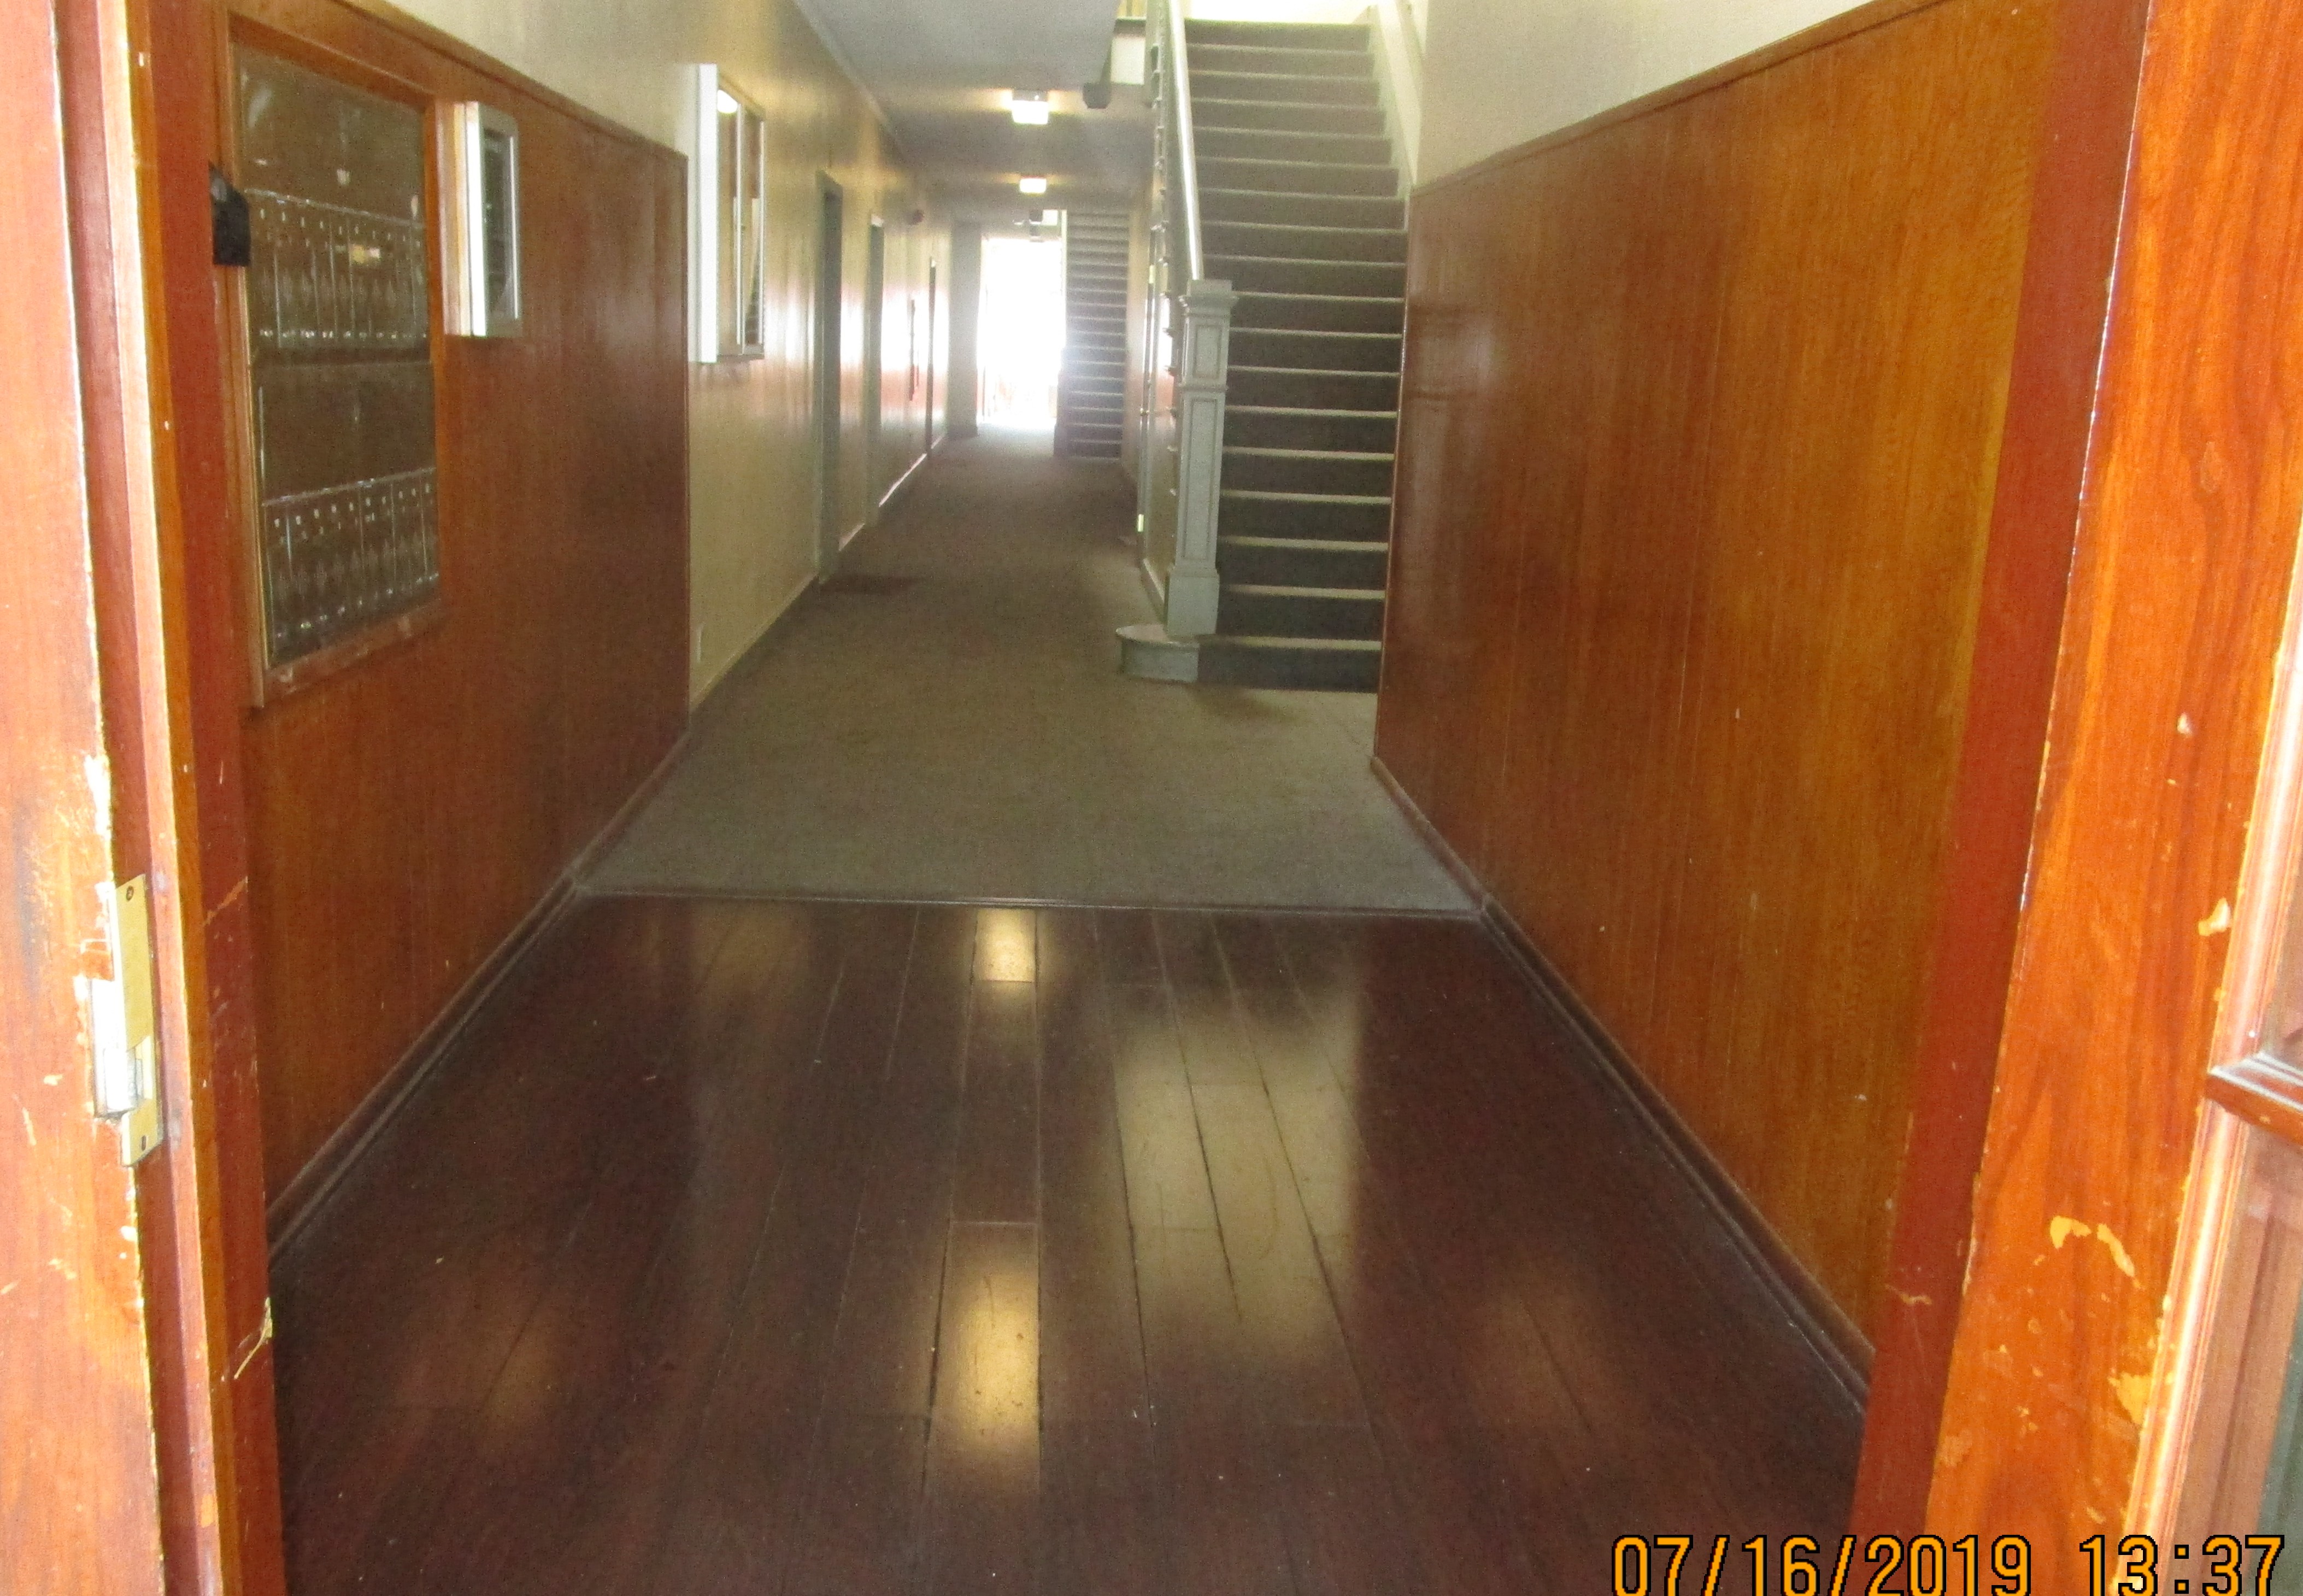 View of long hallway, mailboxes on the left side against the wall, brown wood laminate by the entrance and brown carpet on the hallway, brown carpet stairway with handrails.